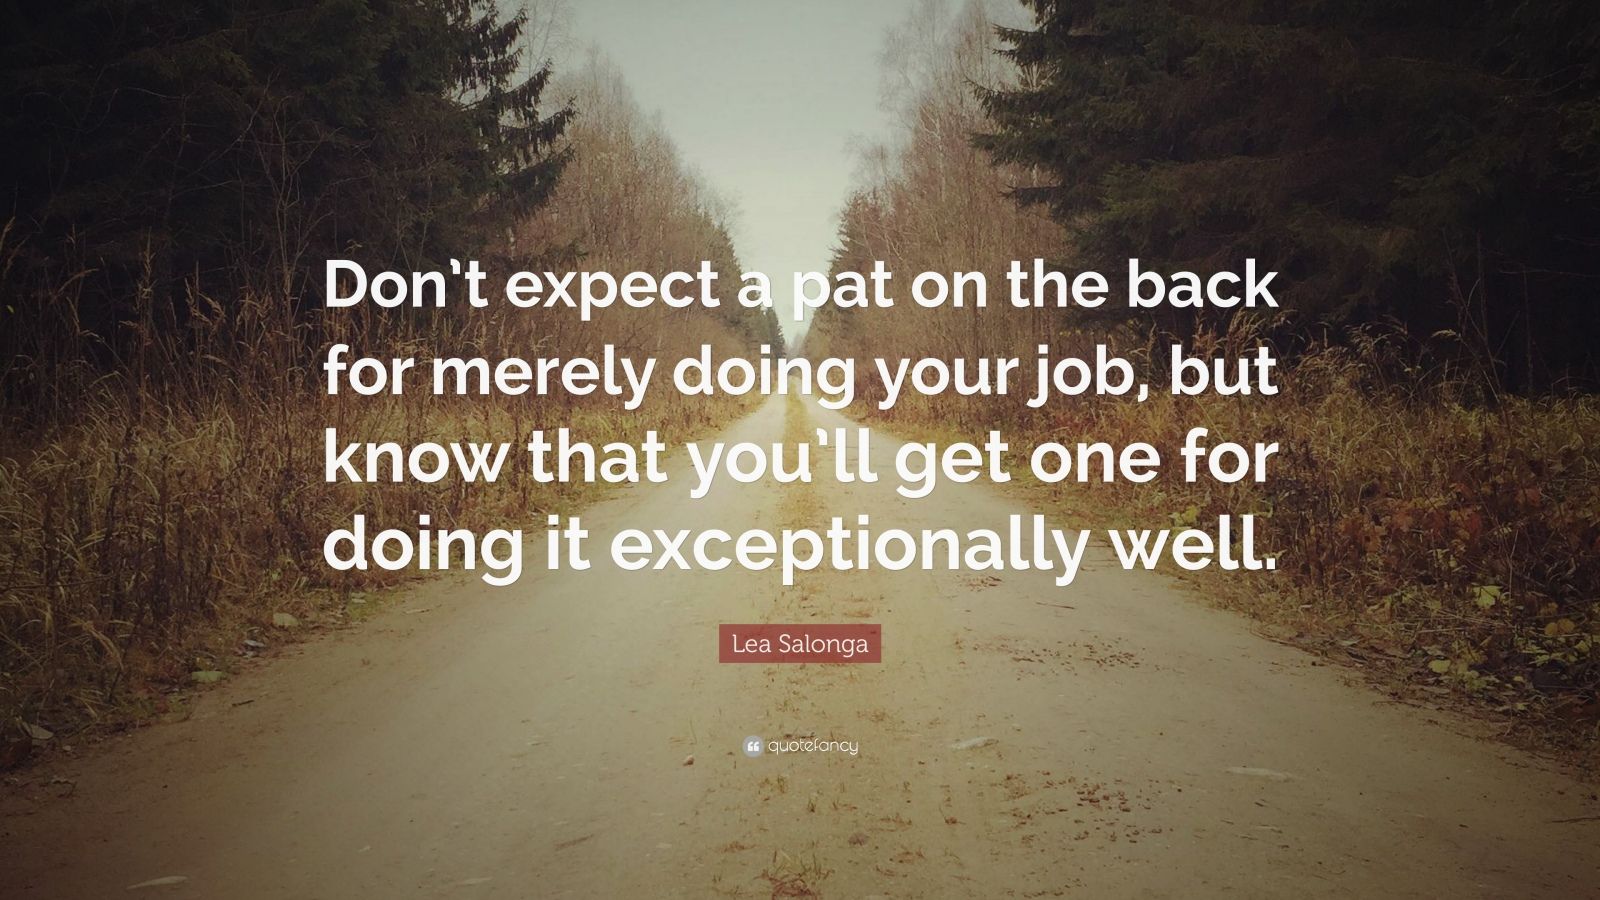 Lea Salonga Quote: “Don’t expect a pat on the back for merely doing ...
 We Have Your Back